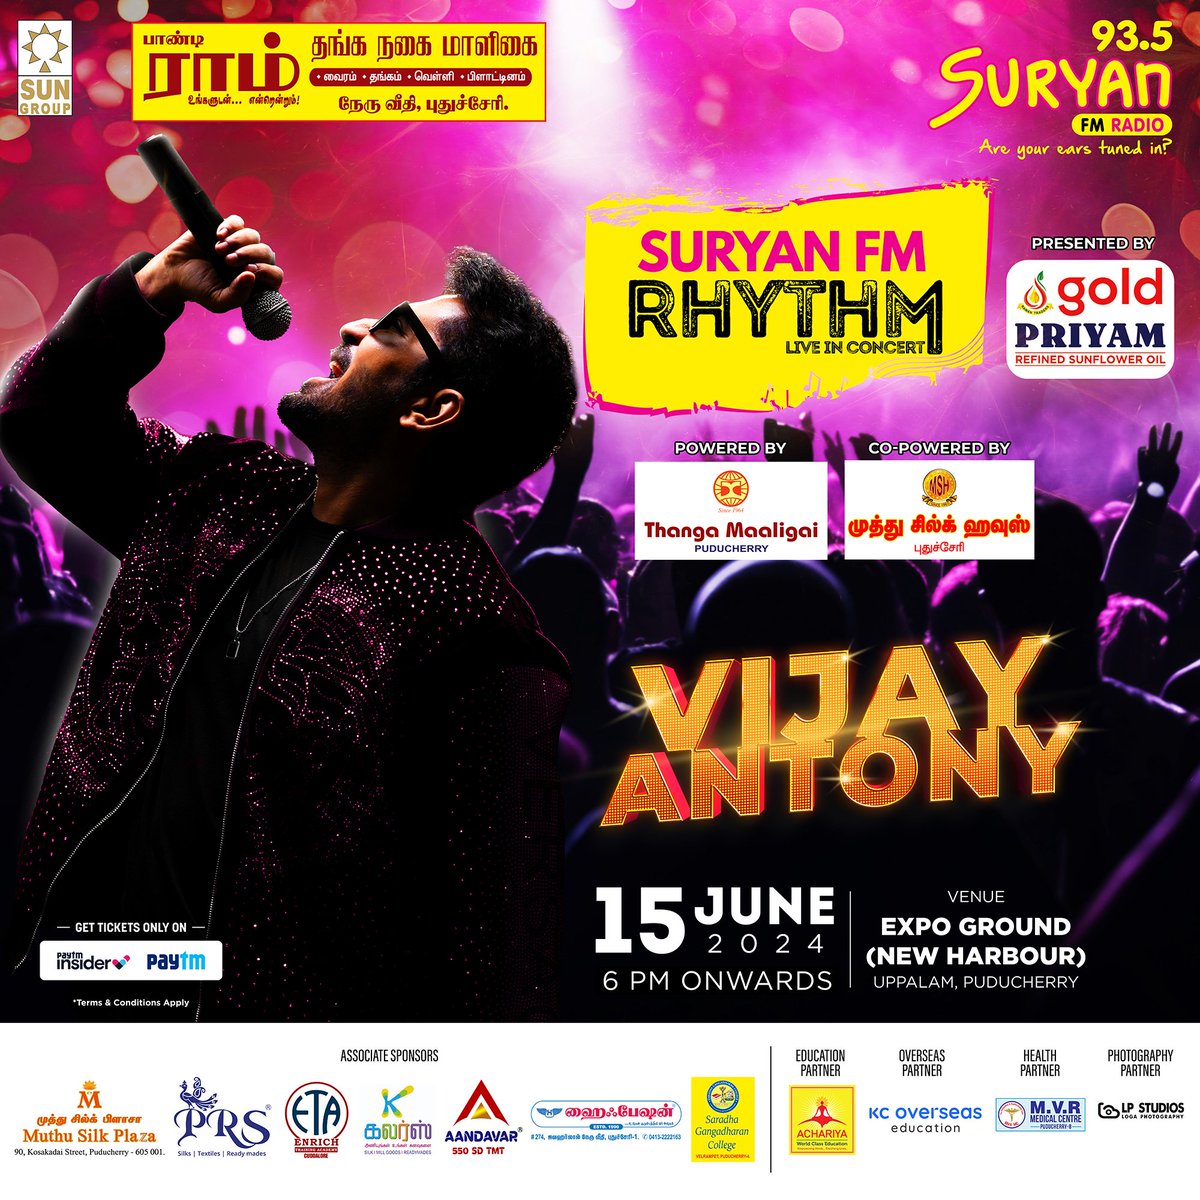 It's time to book your tickets for SURYAN FM RHYTHM LIVE IN CONCERT WITH VIJAY ANTONY 🔥😍 

Pondy Makkaley June 15th is Vijay Antony's day ❤️

LINK : insider.in/suryan-fm-rhyt…
 
.
 
#suryanfm #vijayantonysongs #vijayantonyconcert❤‍🔥 #suryanfmrhythm #rhythmliveinconcert